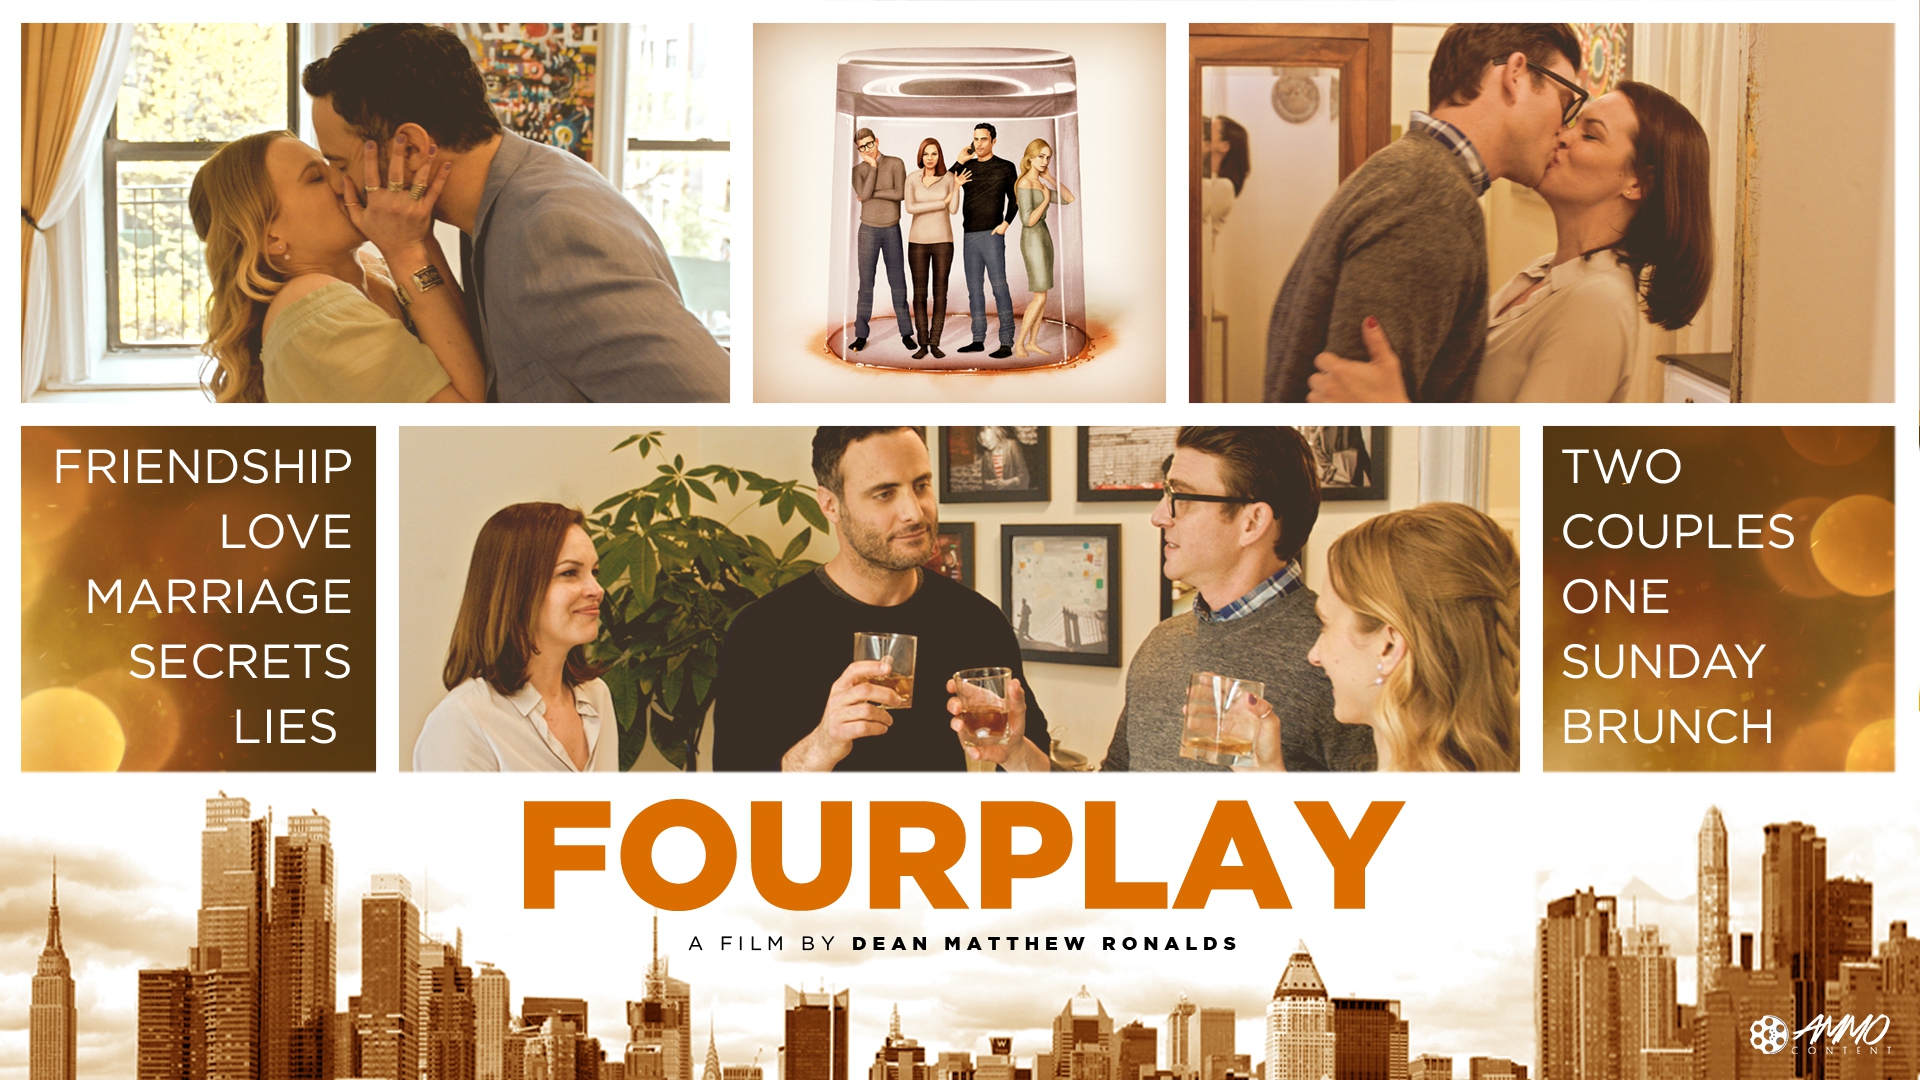 Couples Four Play